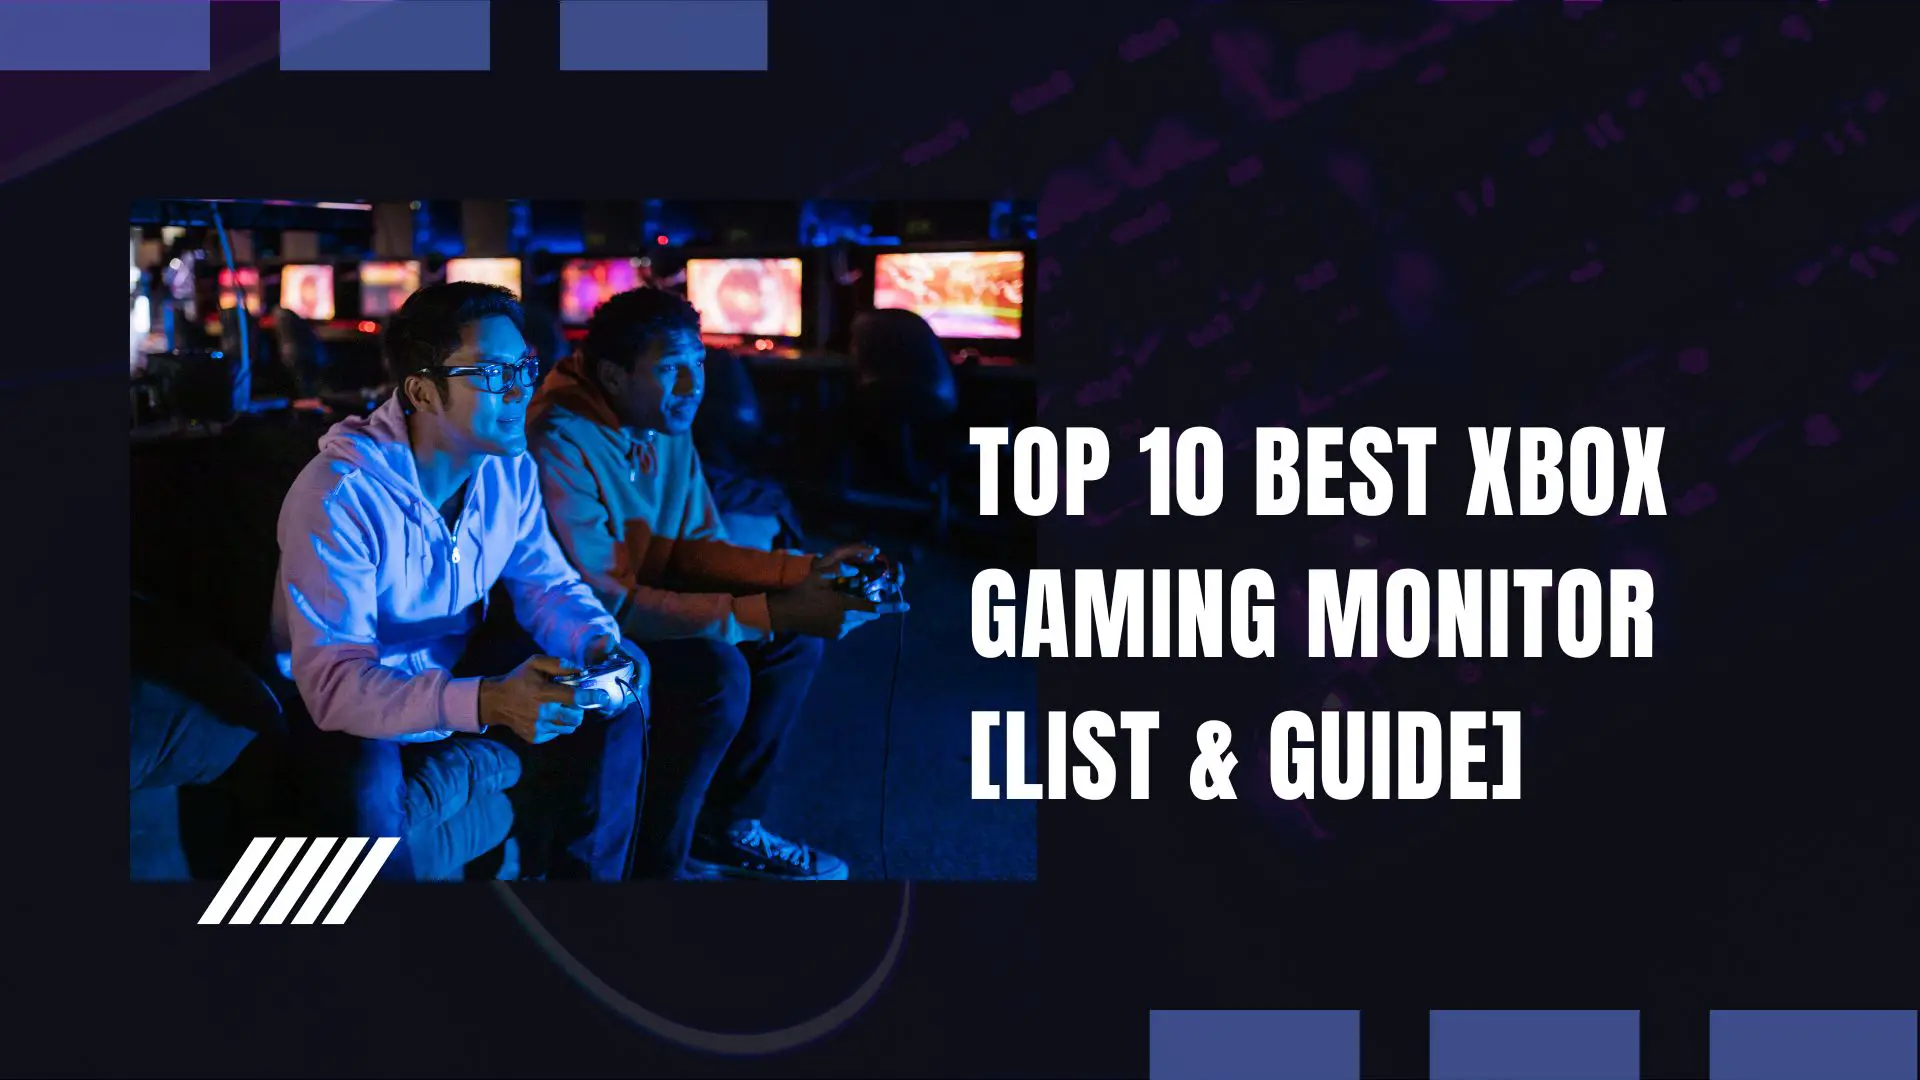 Top 10 Best Xbox Gaming Monitor [List & Guide]